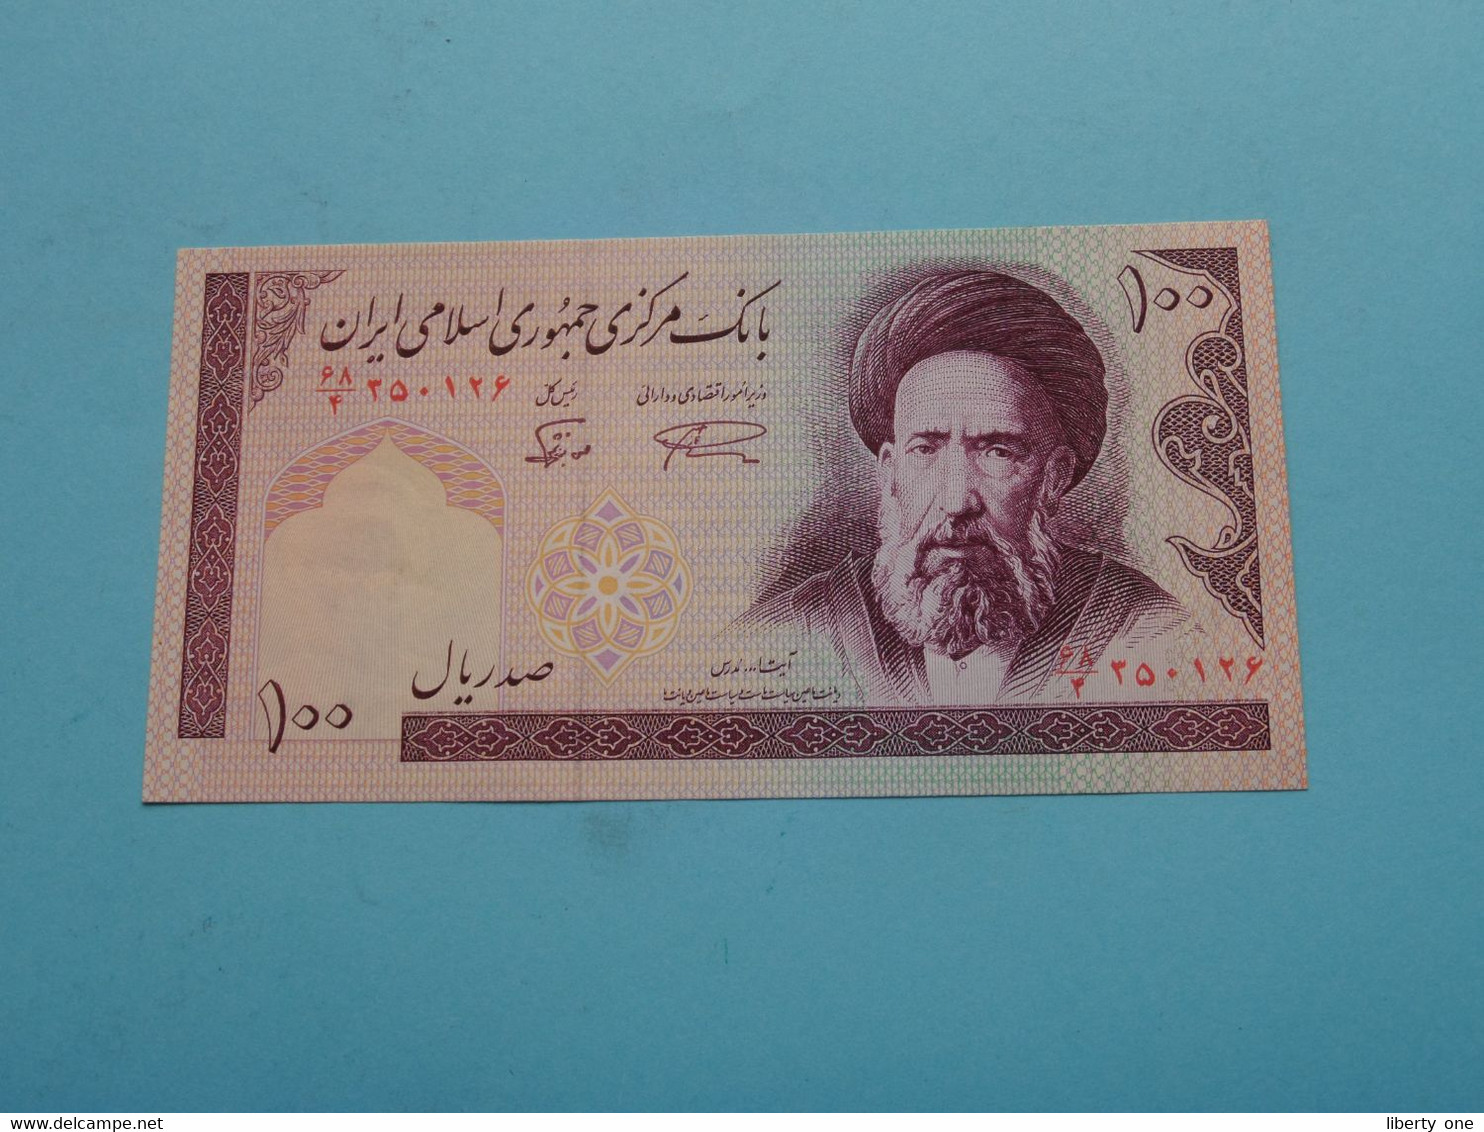 100 RIALS - One Hundred > Central Bank Of The Islamic Republic Of IRAN ( For Grade, Please See Photo ) UNC ! - Irán